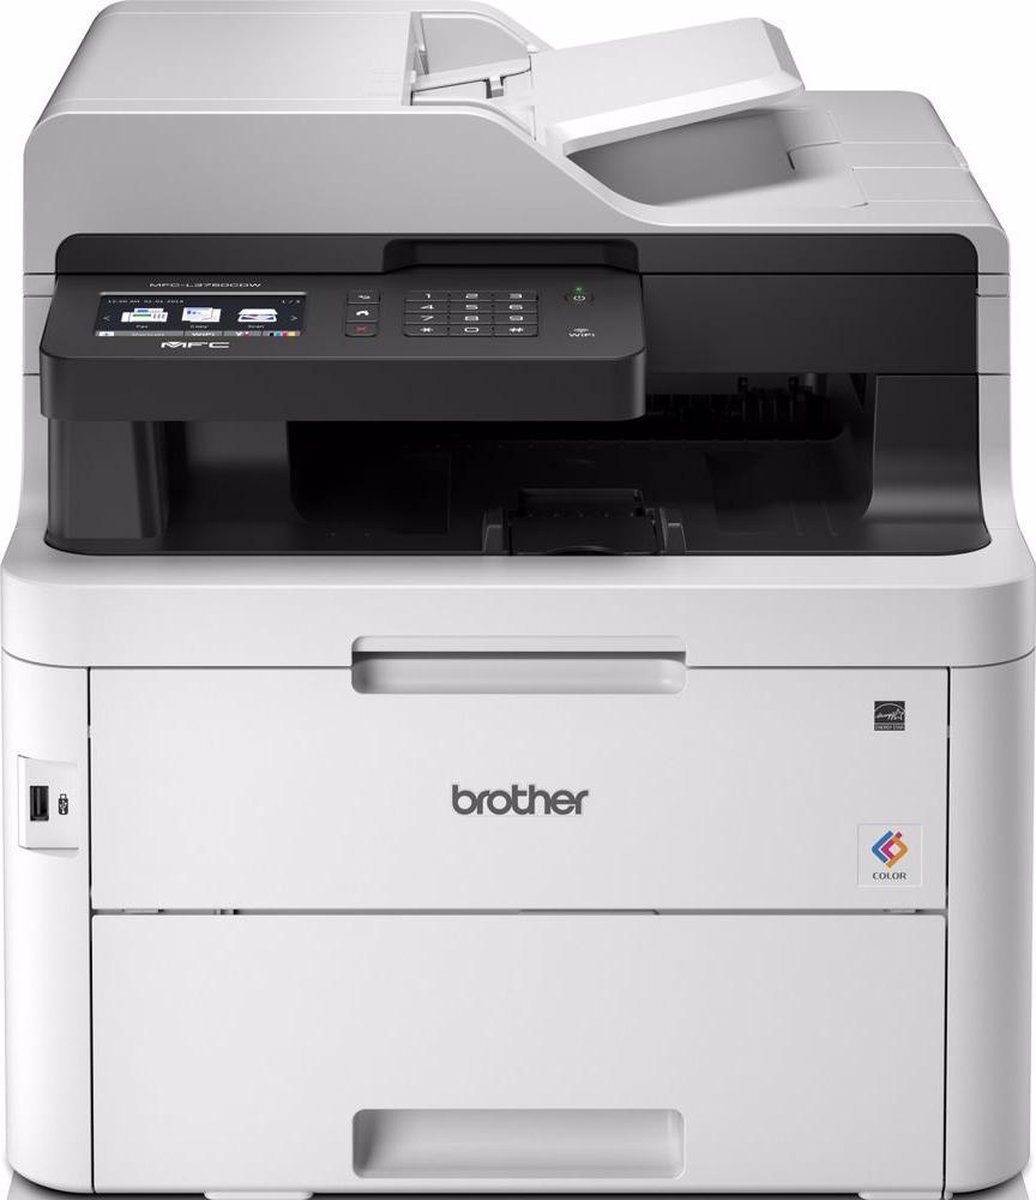 4. Brother MFC-L3750CDW